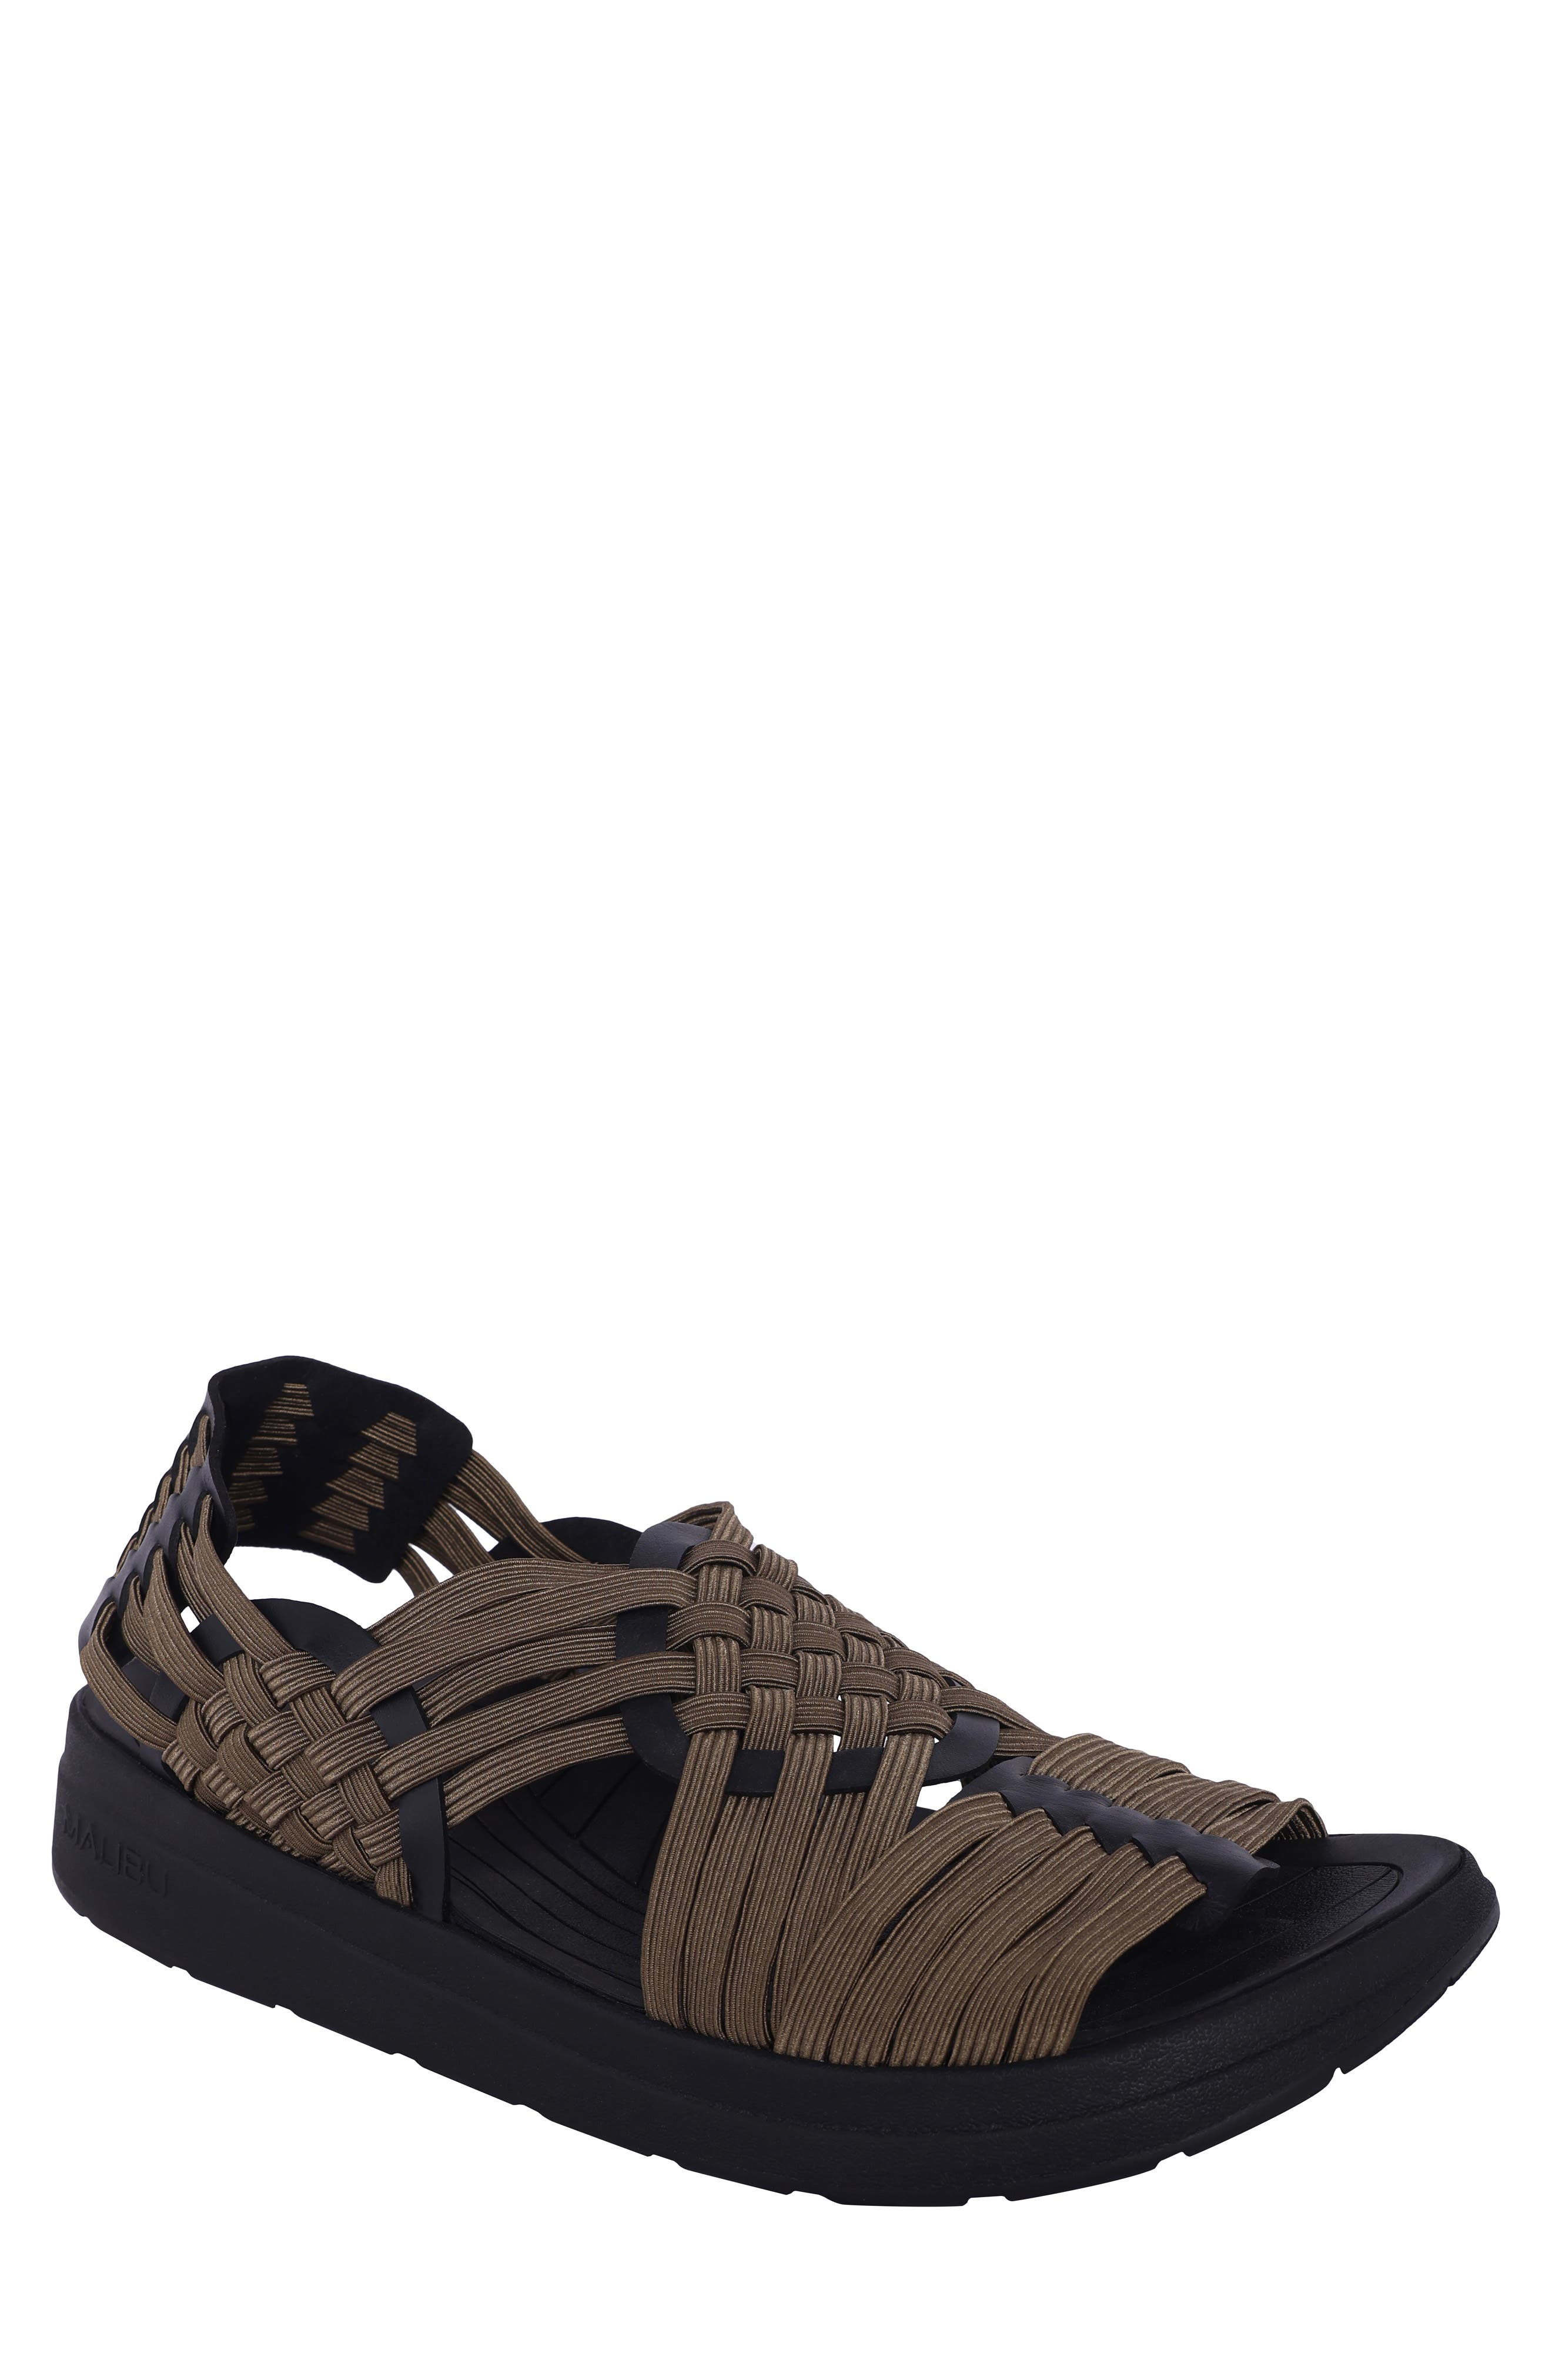 Malibu Sandals Canyon Classic Sandal in Olive/Black at Nordstrom